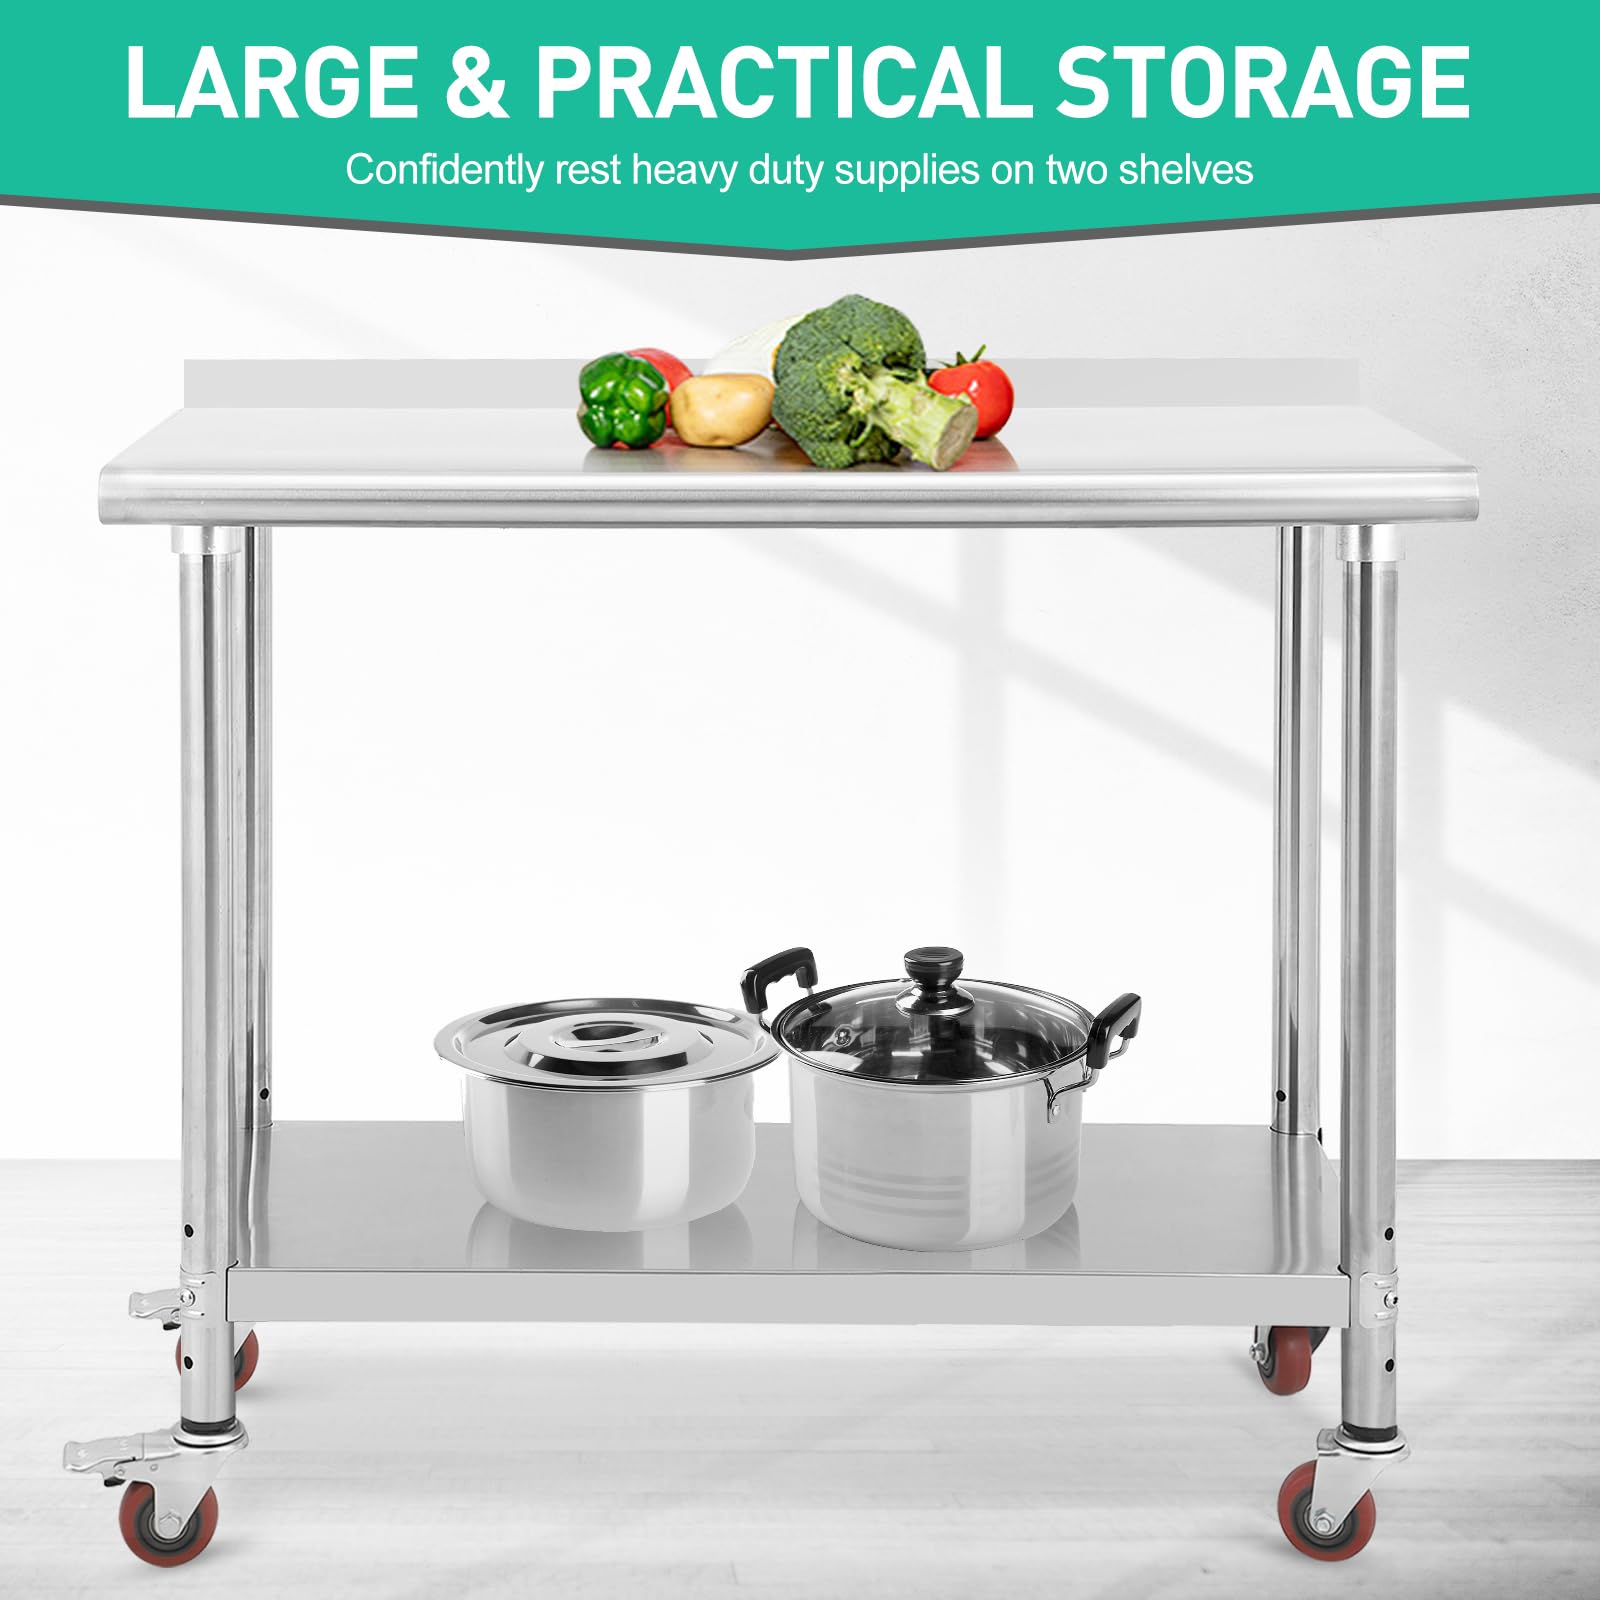 48x24x35 Inch Stainless Steel Table Metal Double Tier Worktable